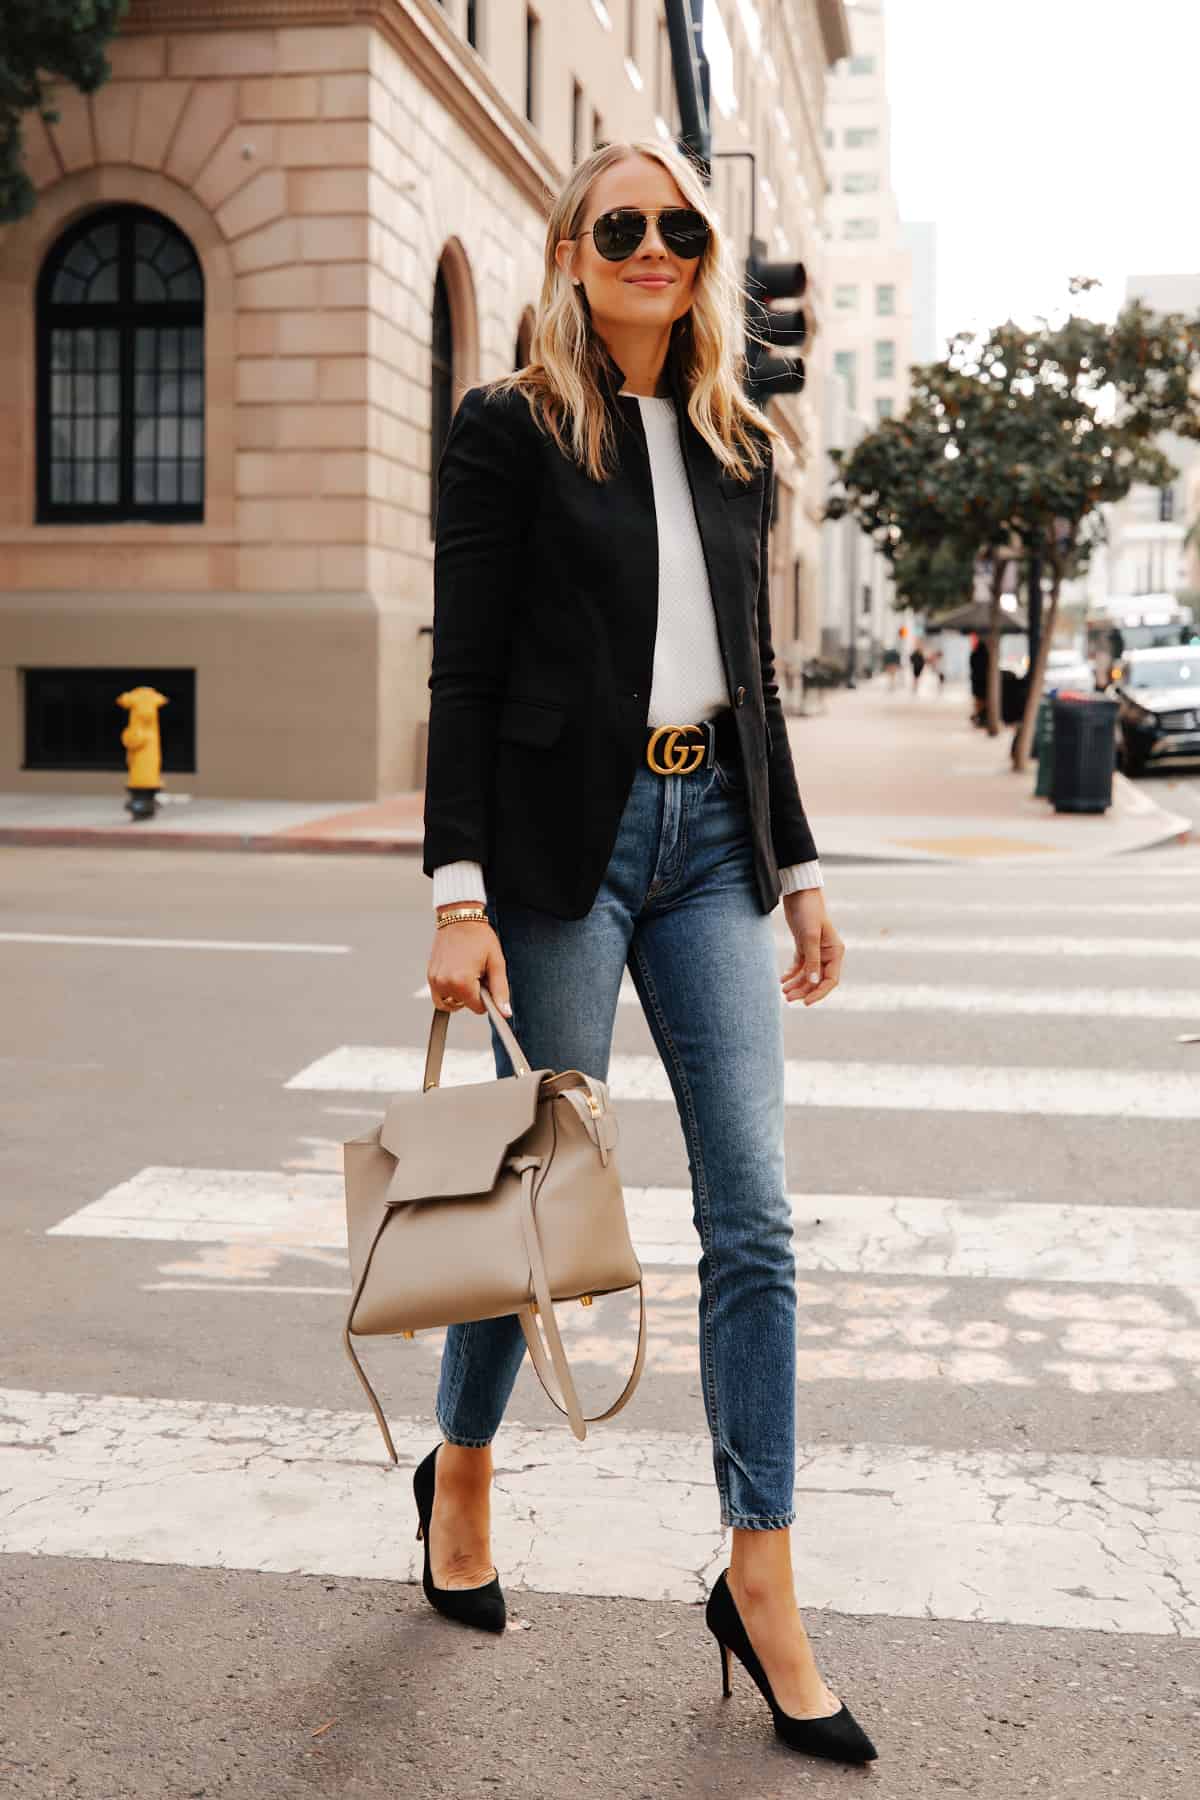 image of a woman wearing a black blazer, white top, jeans with a Gucci belt and black pumps